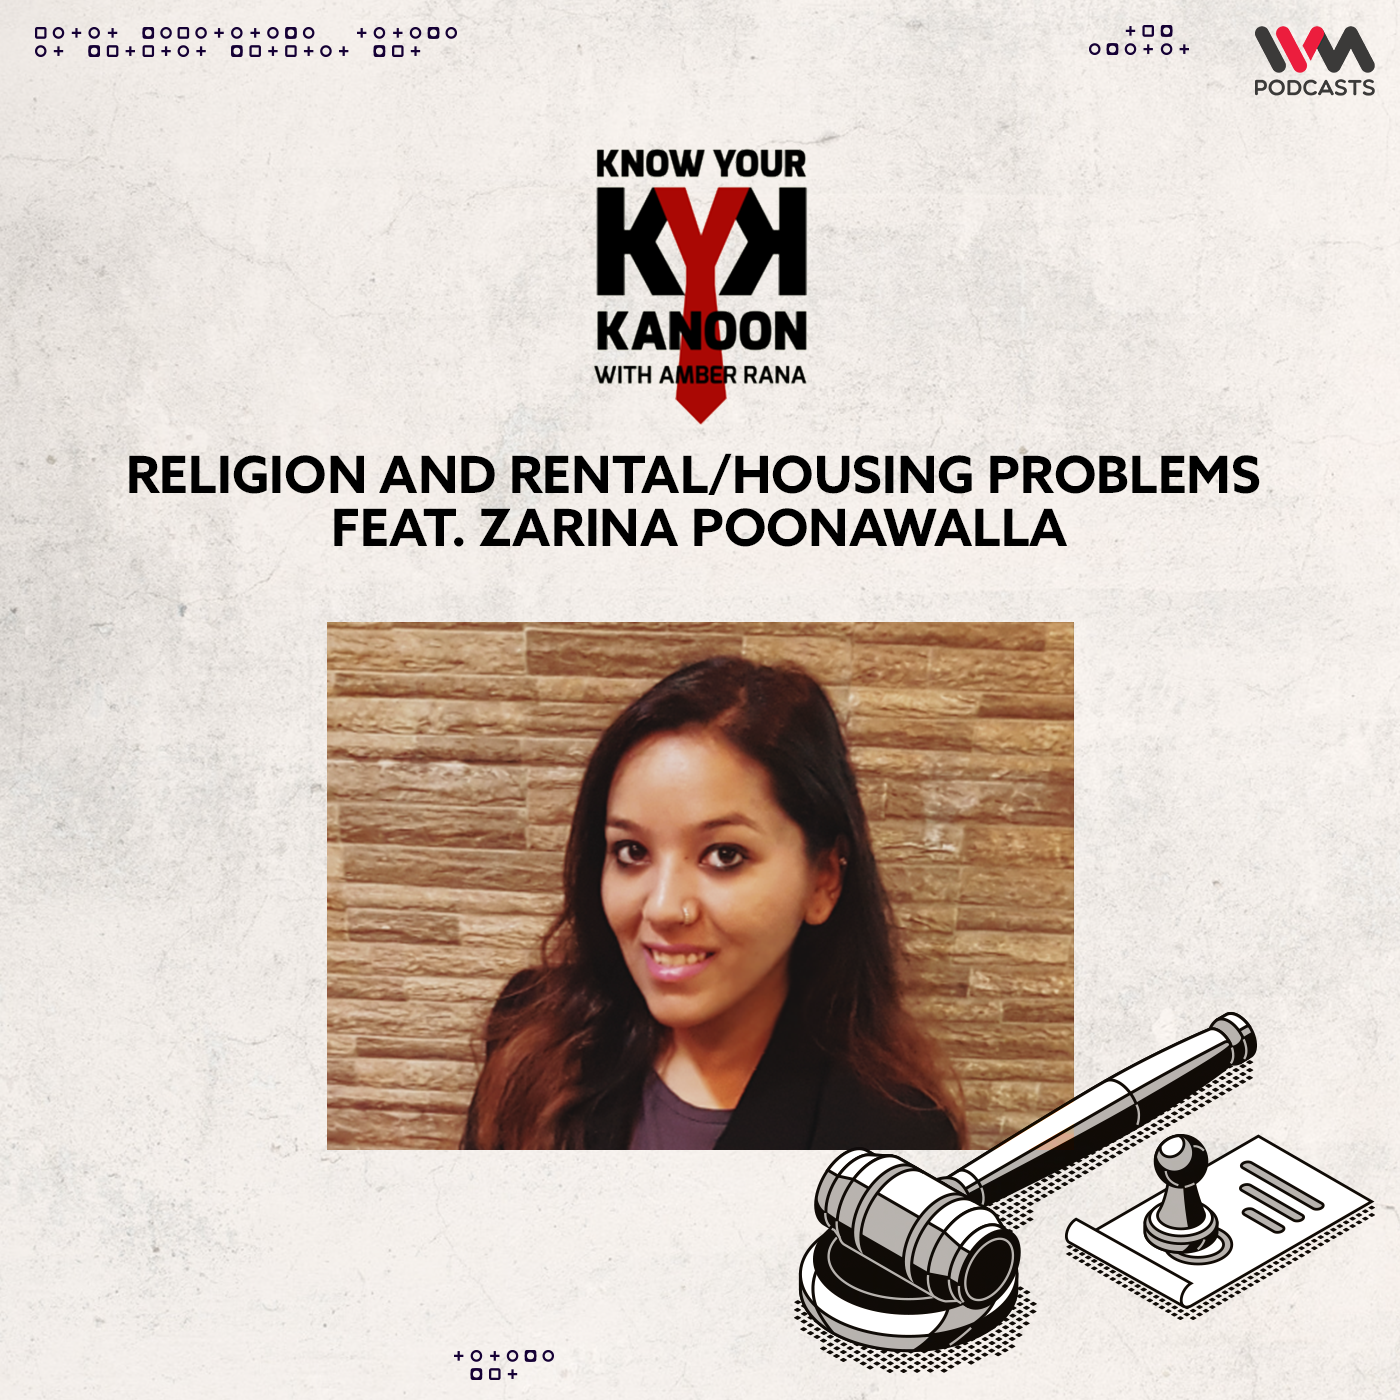 Religion and Rental/Housing Problems Feat. Zarina Poonawalla